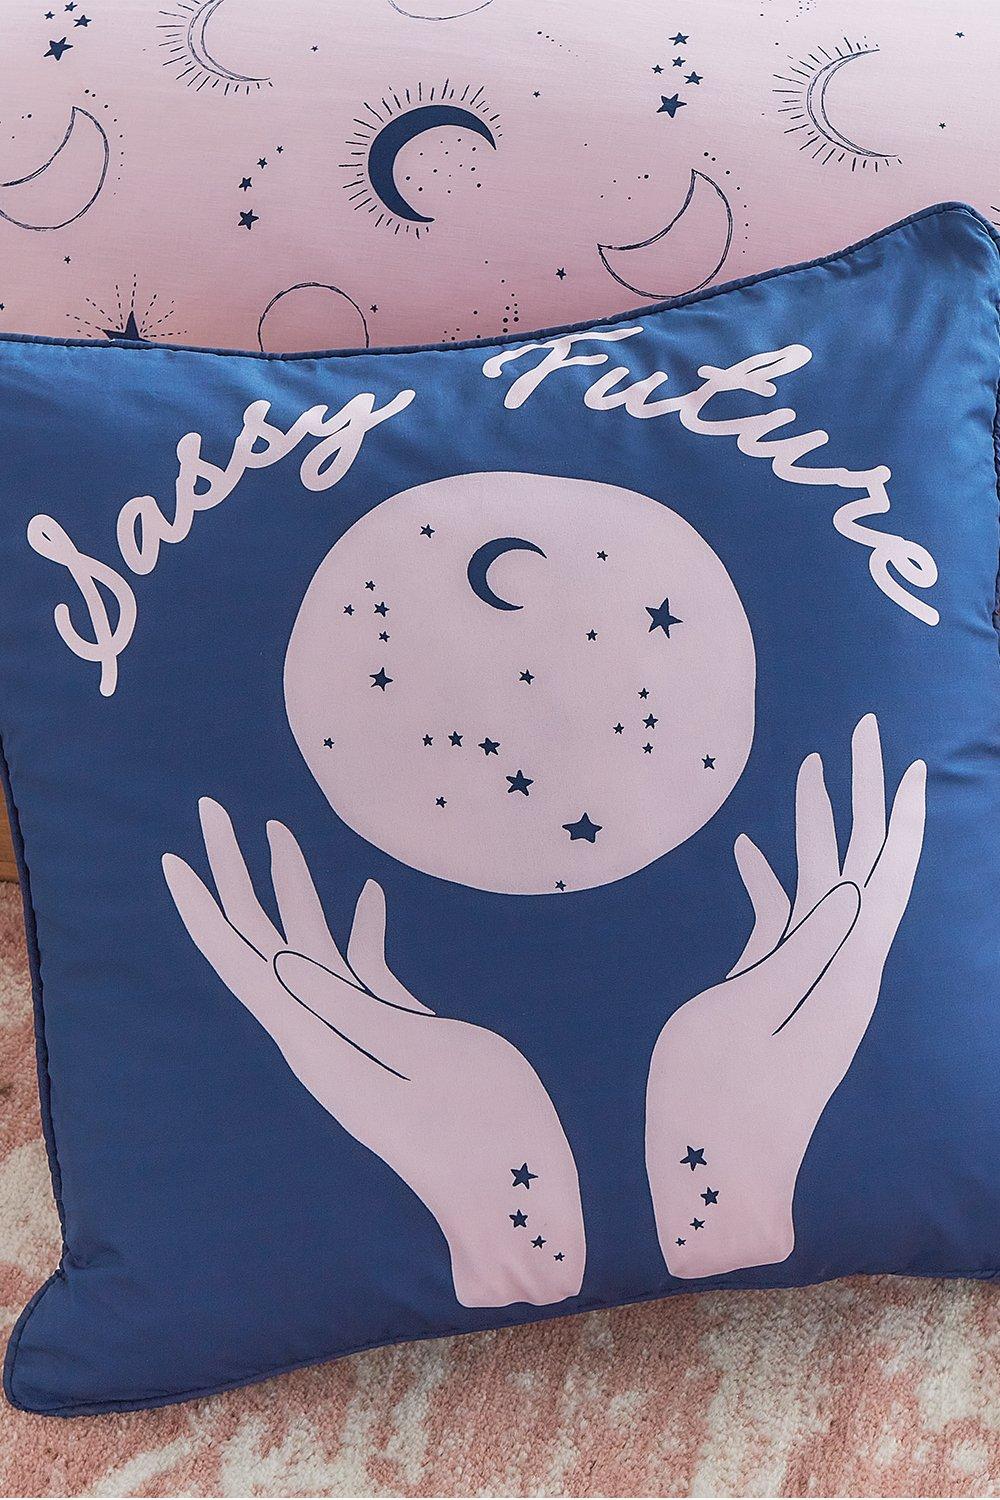 Picture of Sassy Future Cushion